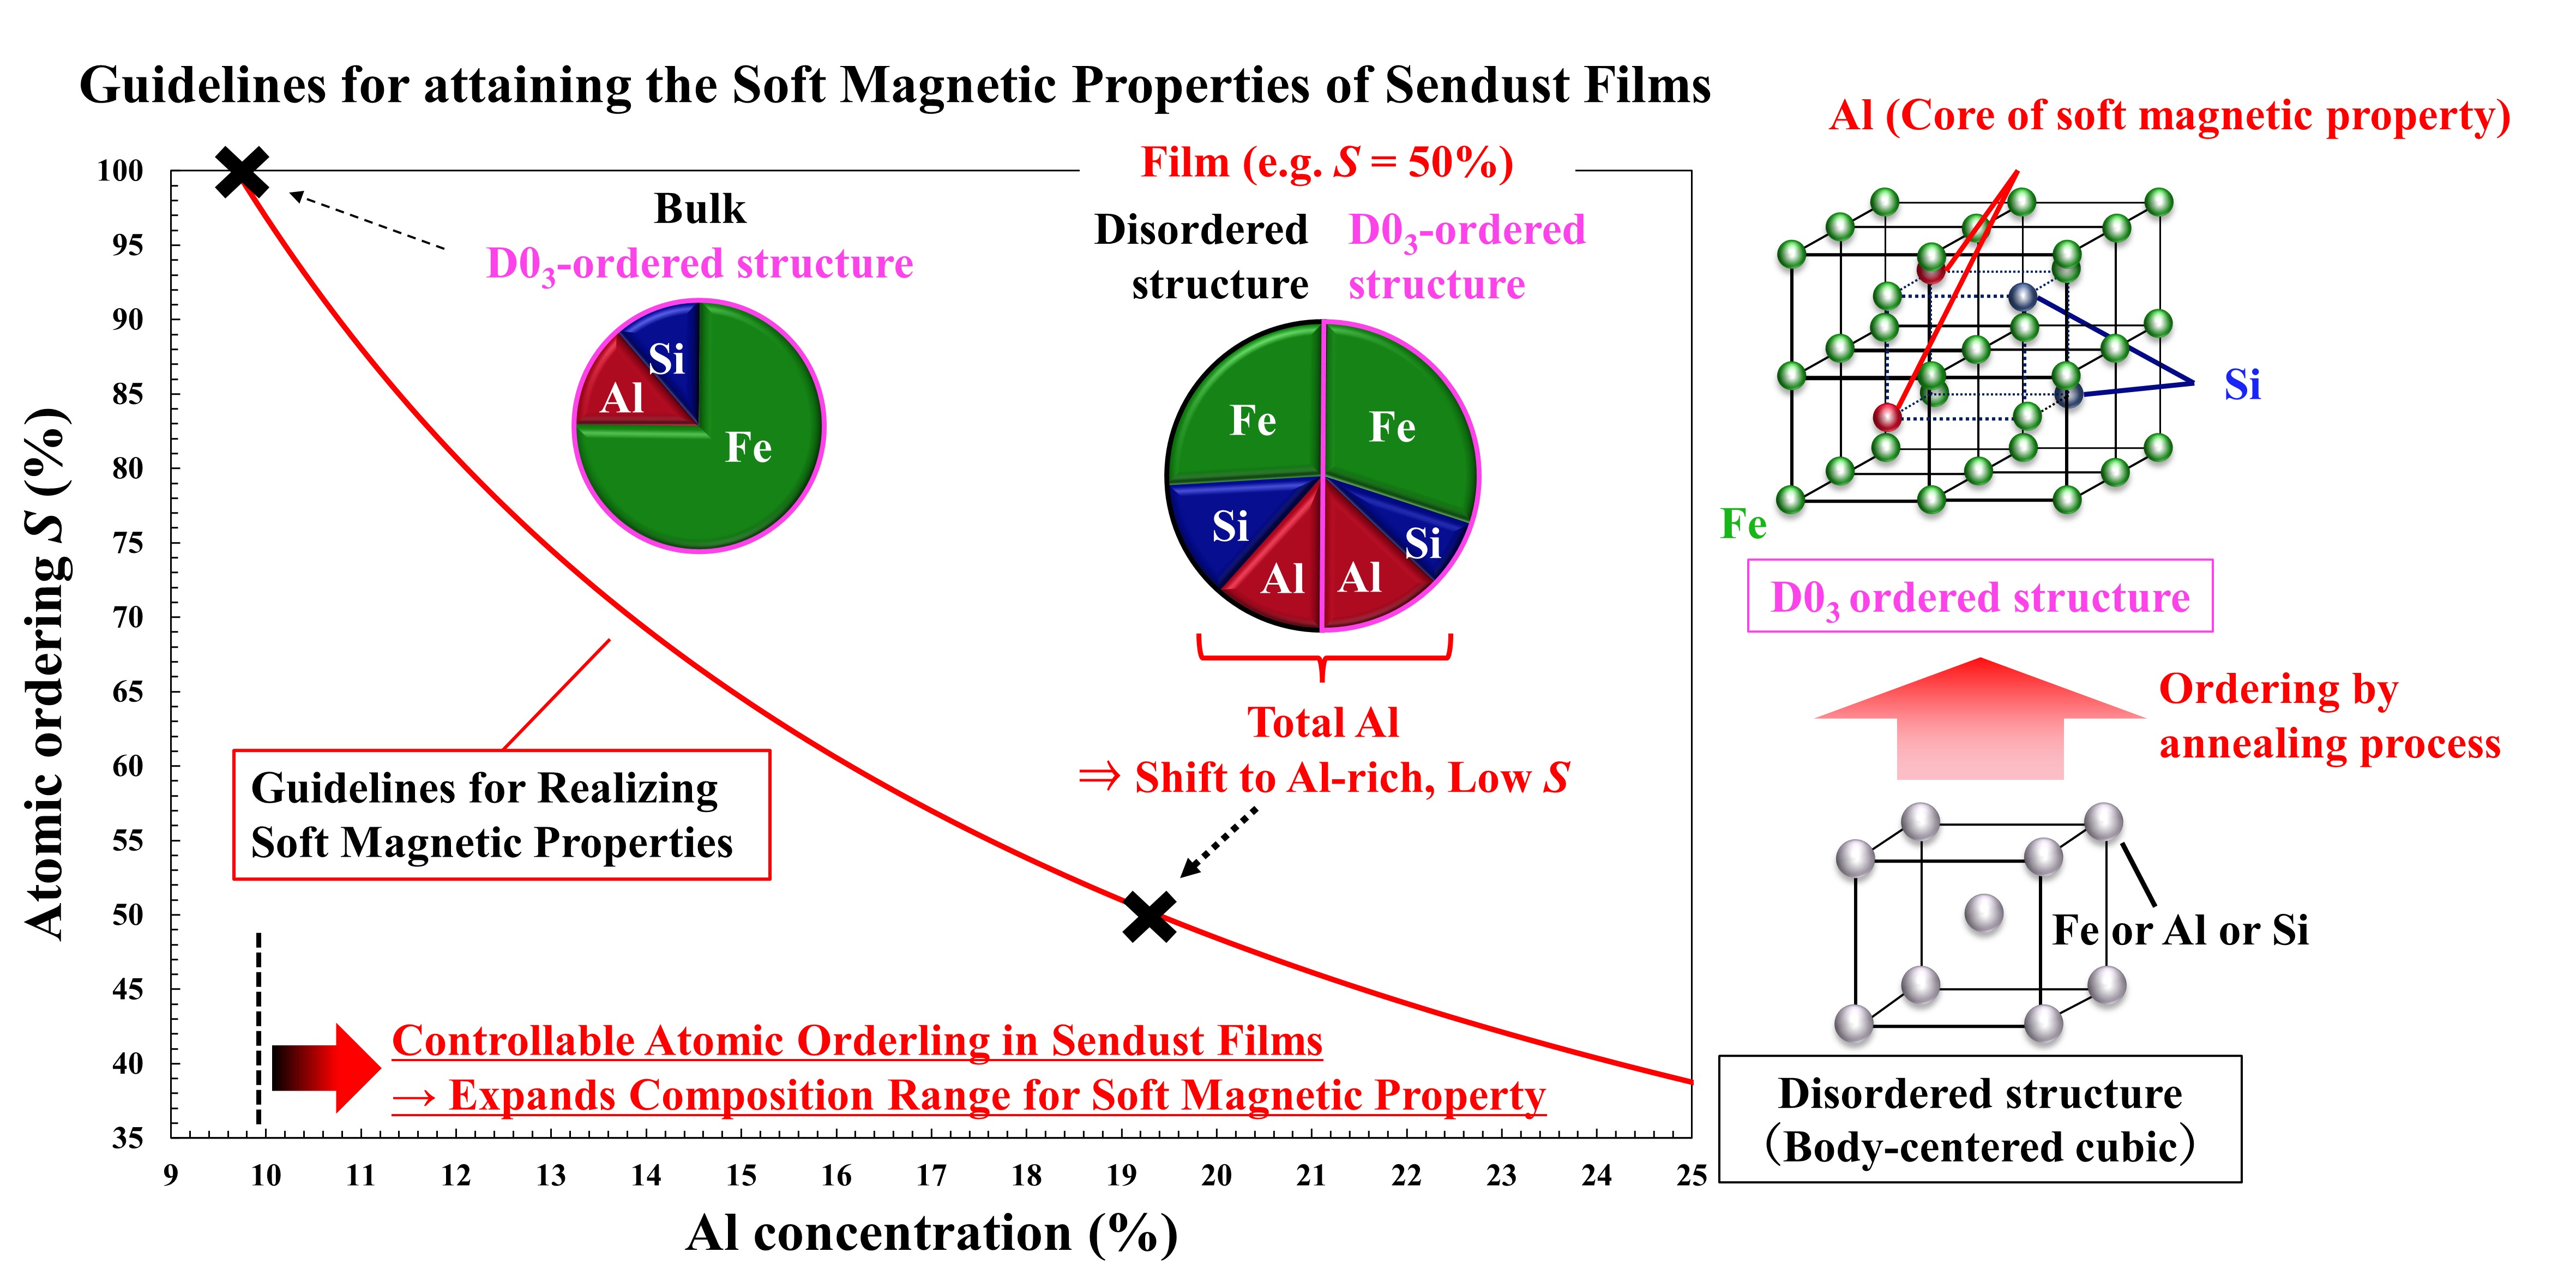 Labeled Guidelines for attaining the soft magnetic properties of sendust films. Figure shows graph comparing Al concentration % and atomic order %, showing thin films as aluminum rich. 